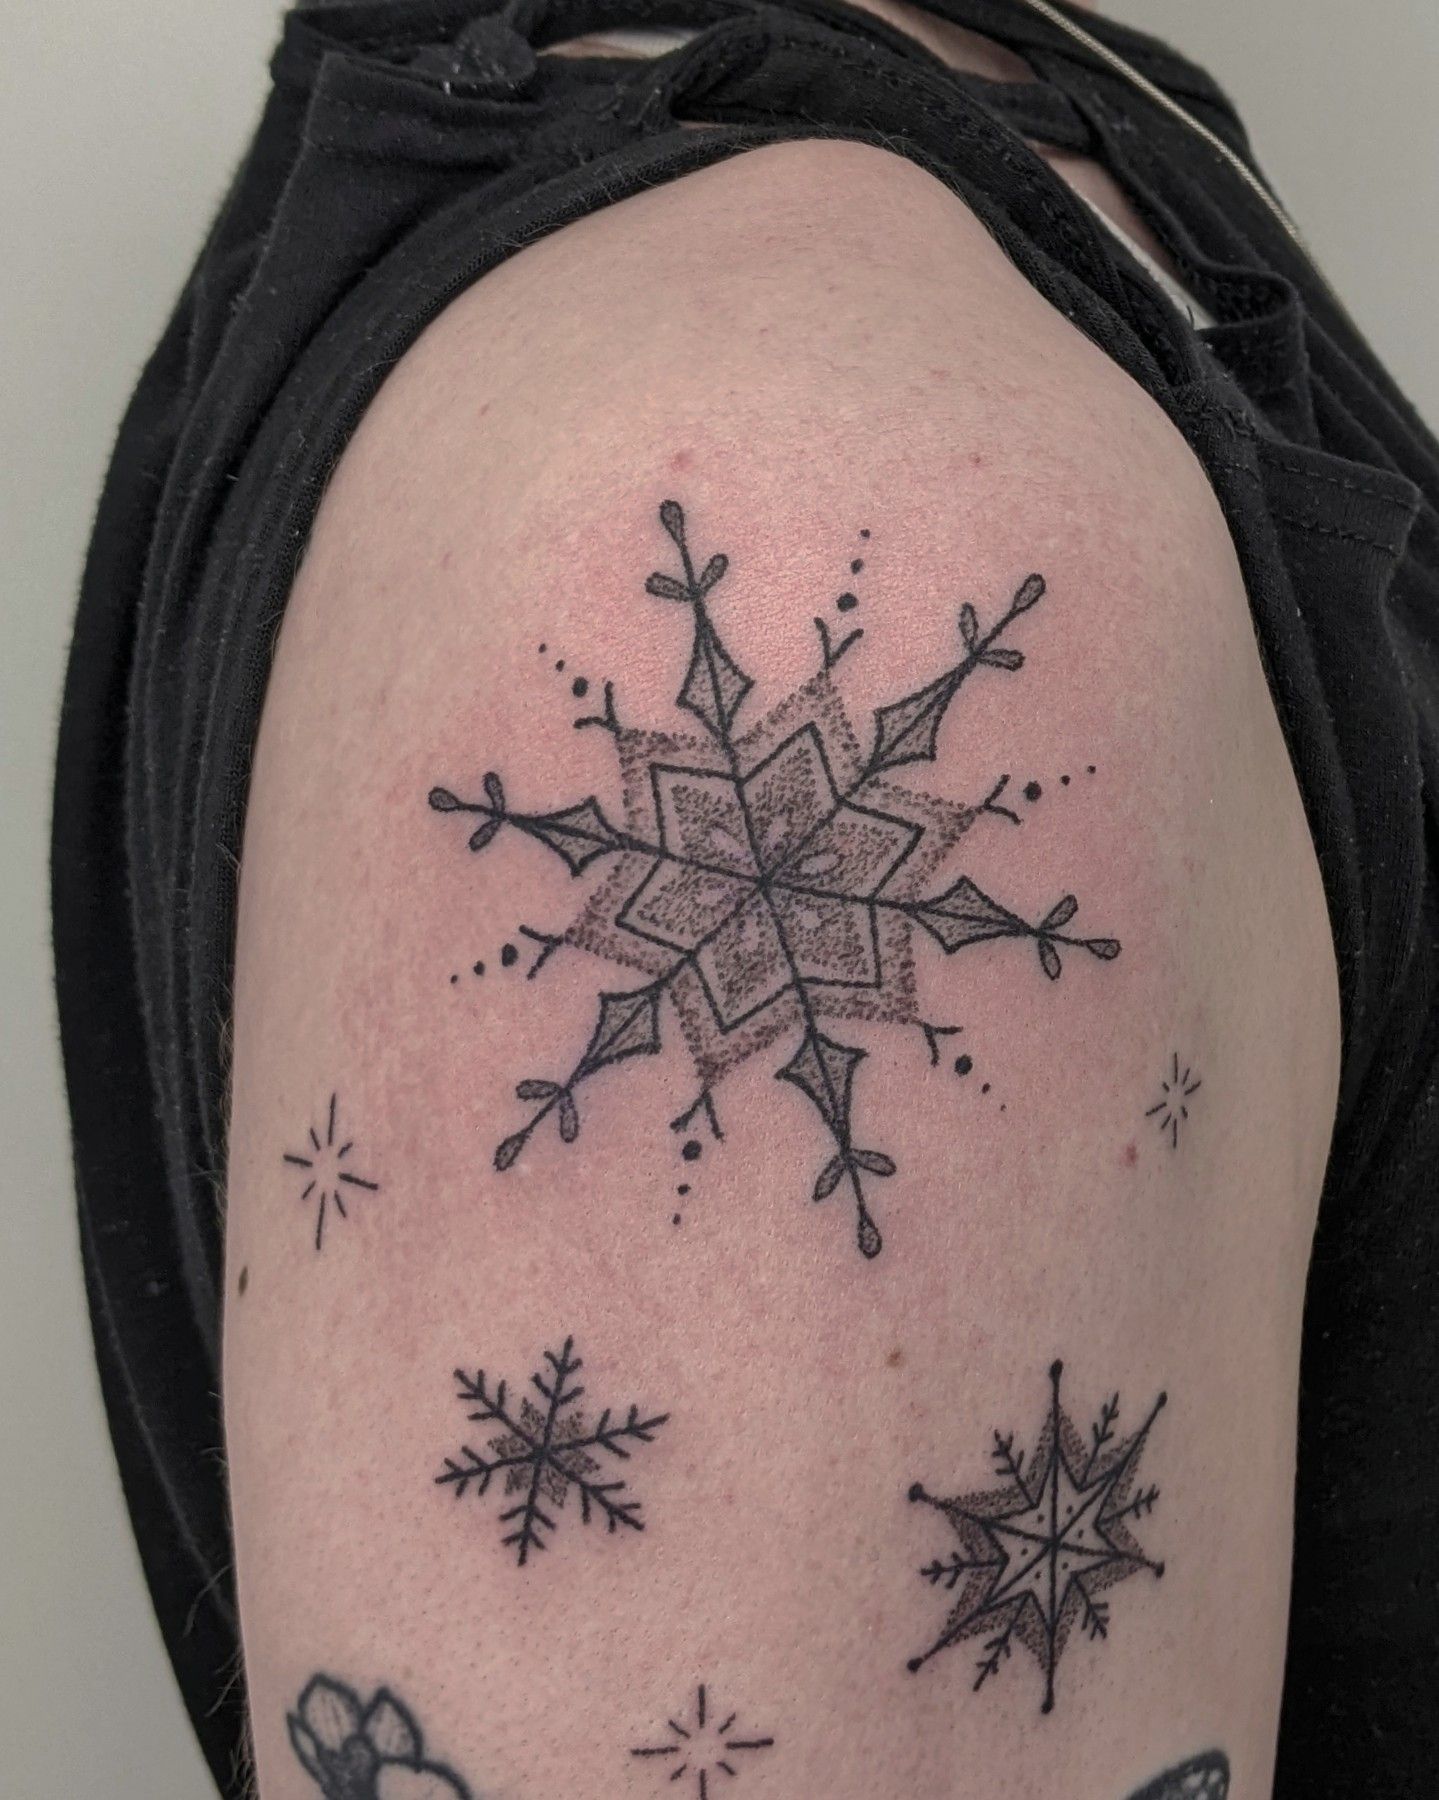 Some fun little snowflakes done... - Tattoos By Katt Franich | Facebook